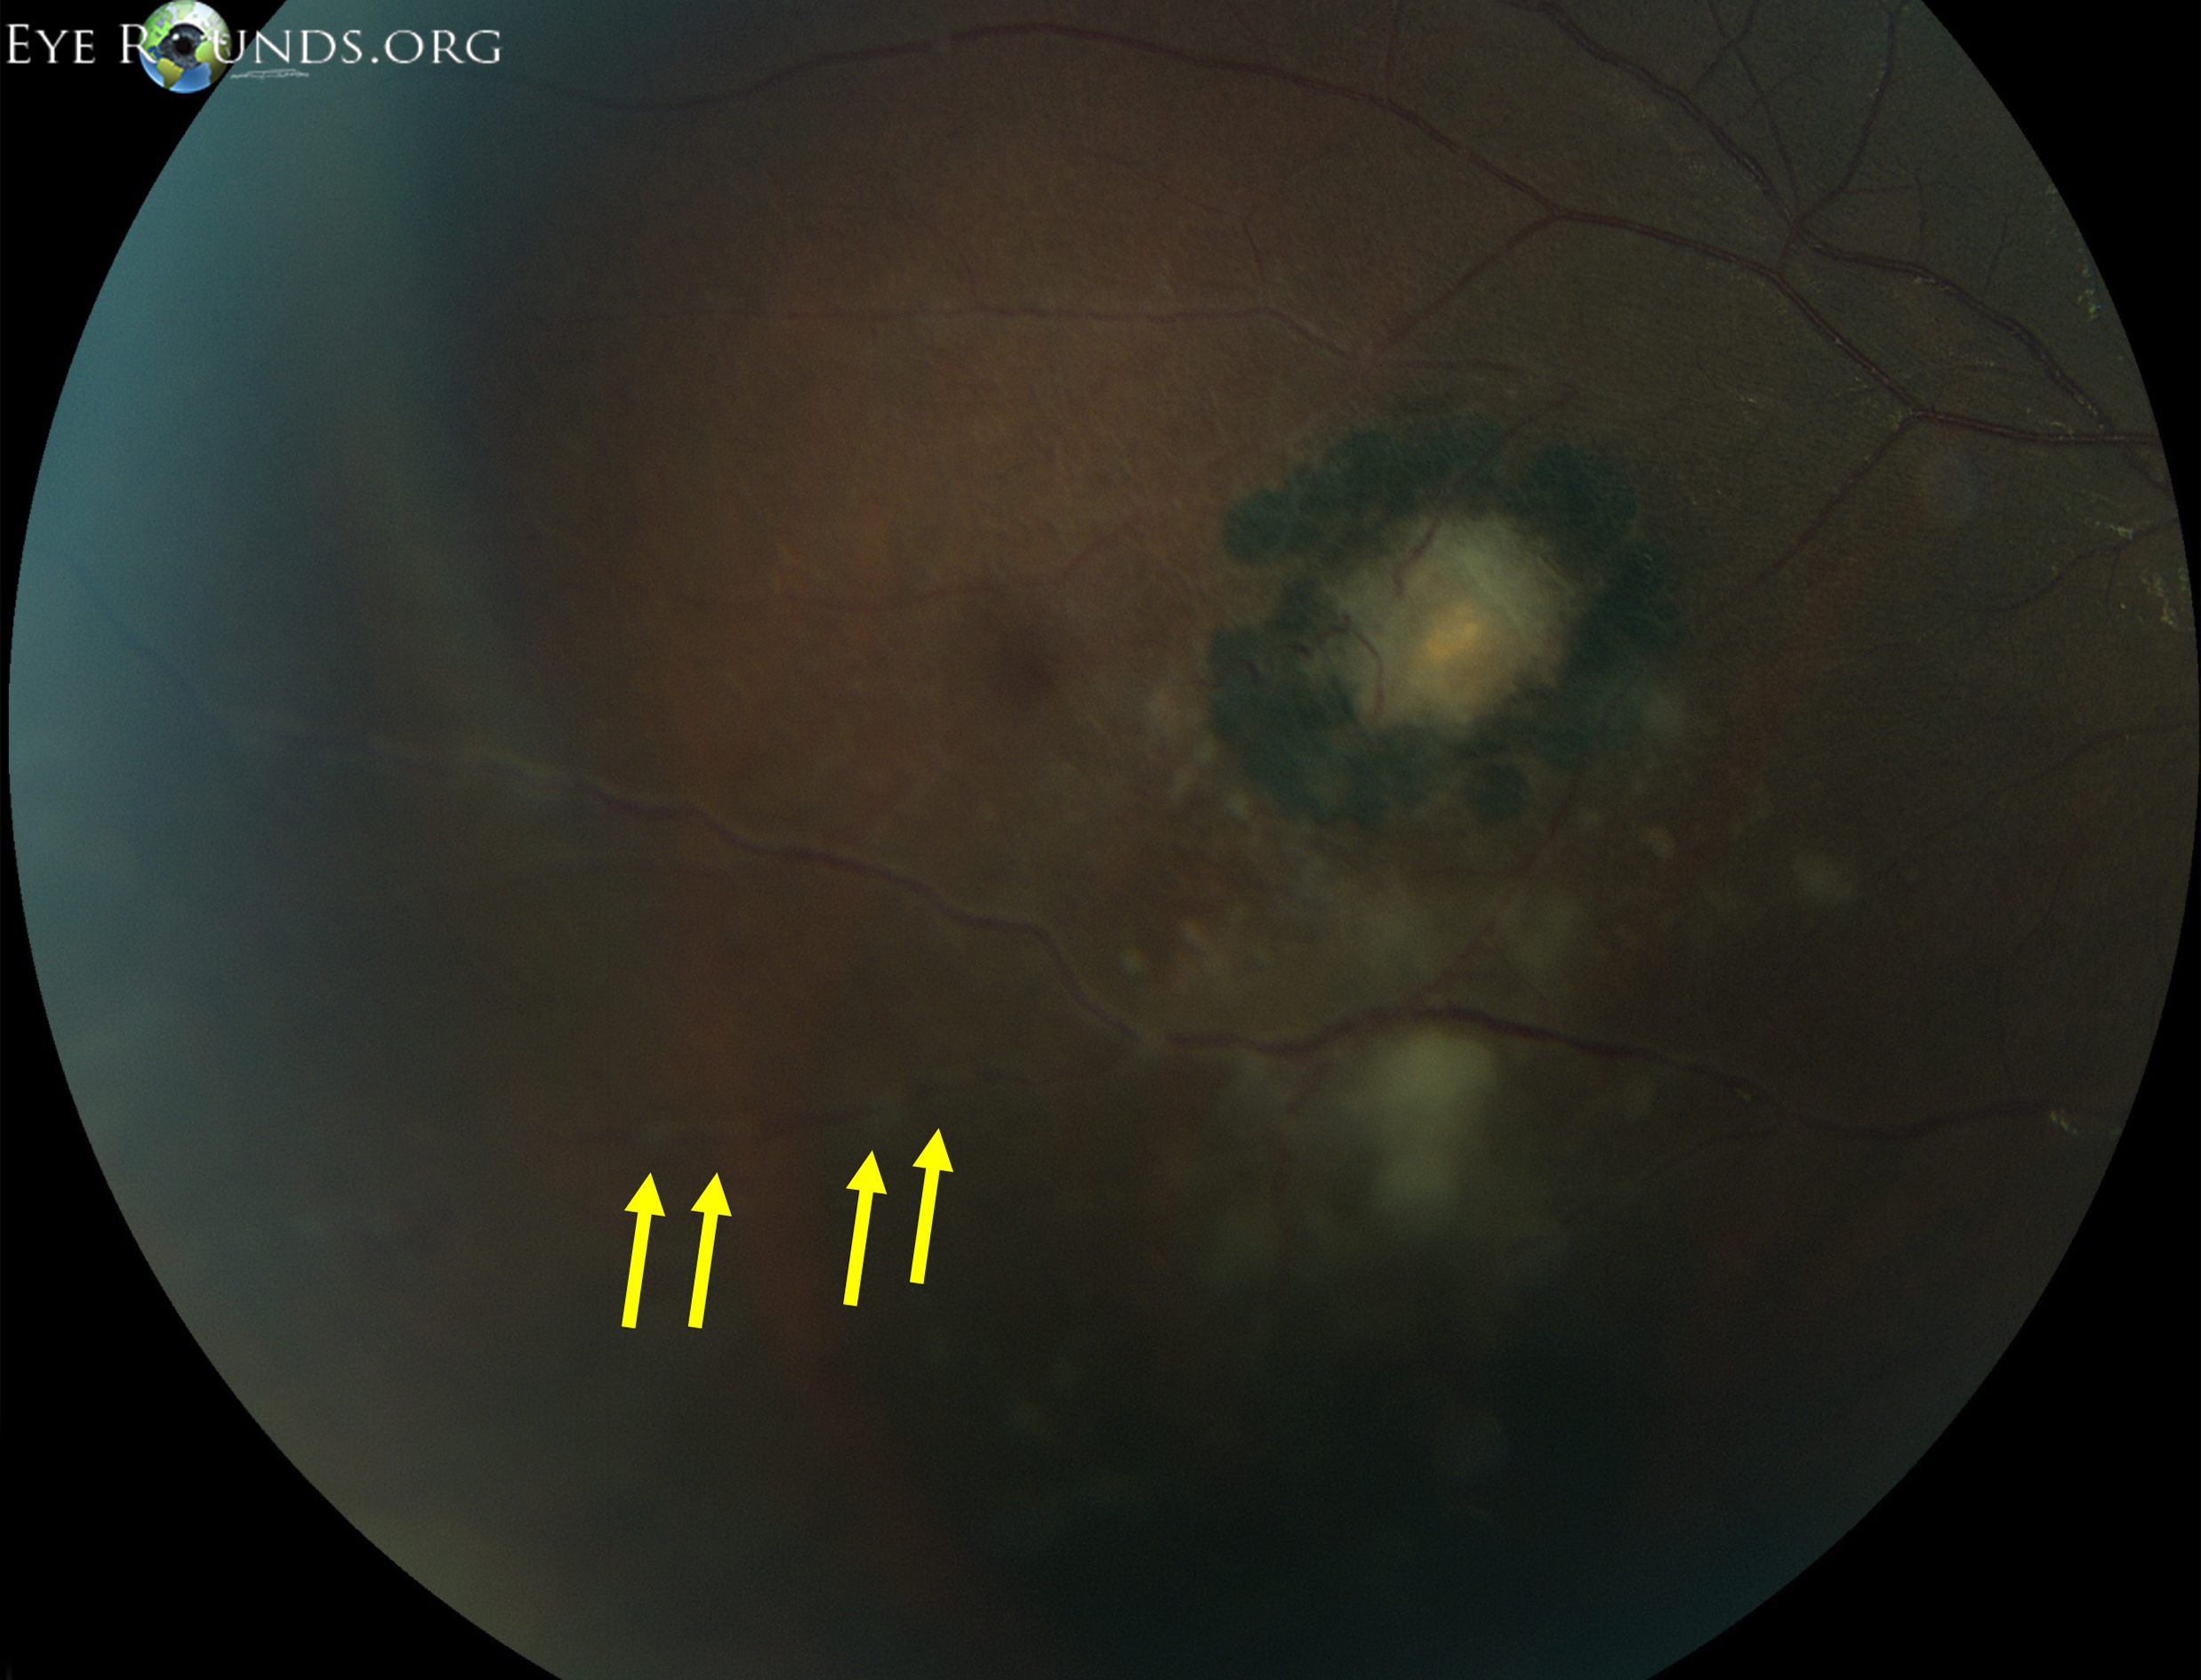 magnification inferotemporally showed an old pigmented scar with an adjacent area of active chorioretinitis. The yellow arrows point to faint Kyrieleis' vascular plaques.